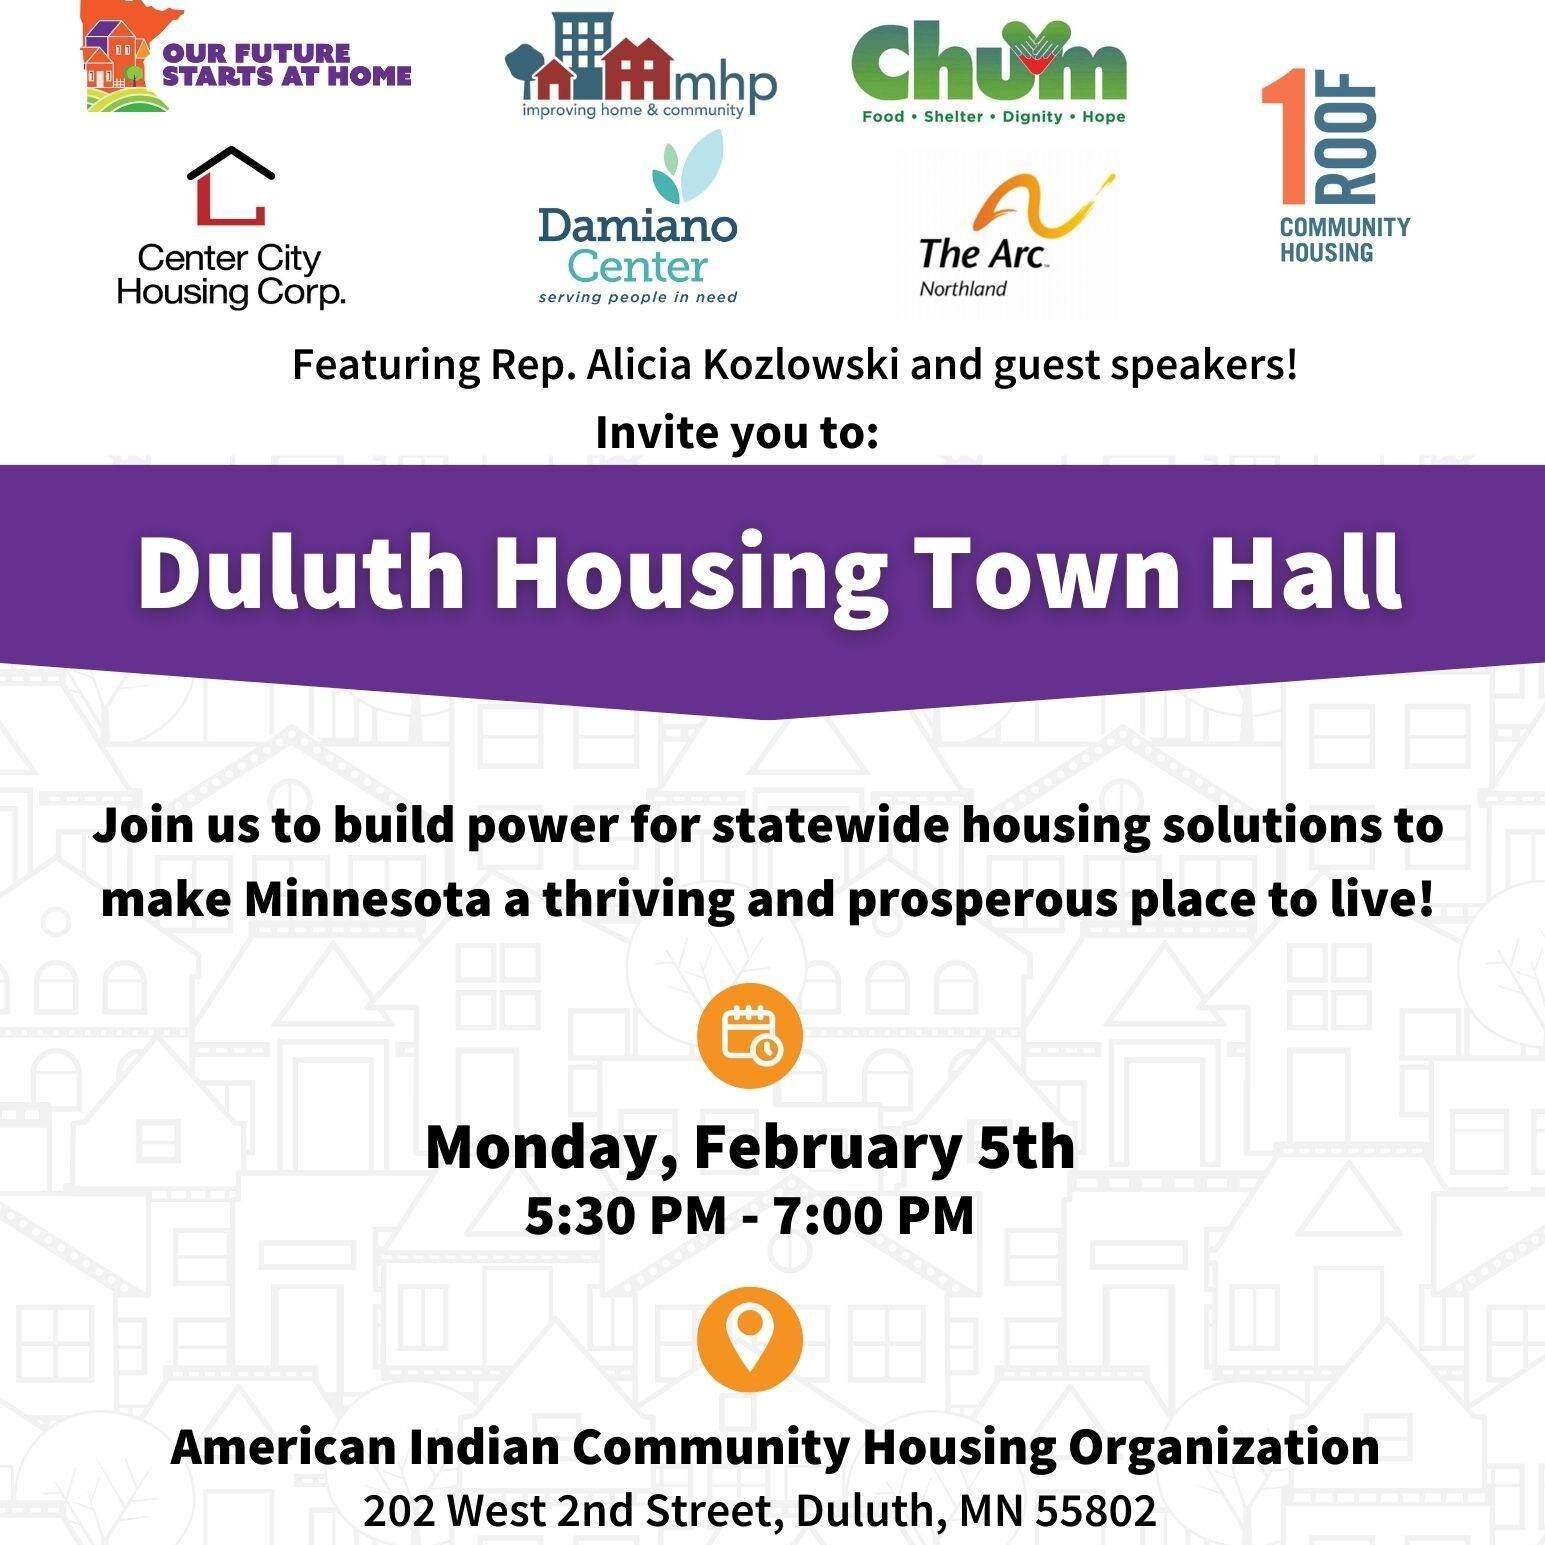 Please join us to listen to our neighbors' housing experiences and help build momentum for housing solutions statewide! The event will include legislative speakers @liishkozlowski and @jenmcewenmn, policy engagement activities, and light refreshments